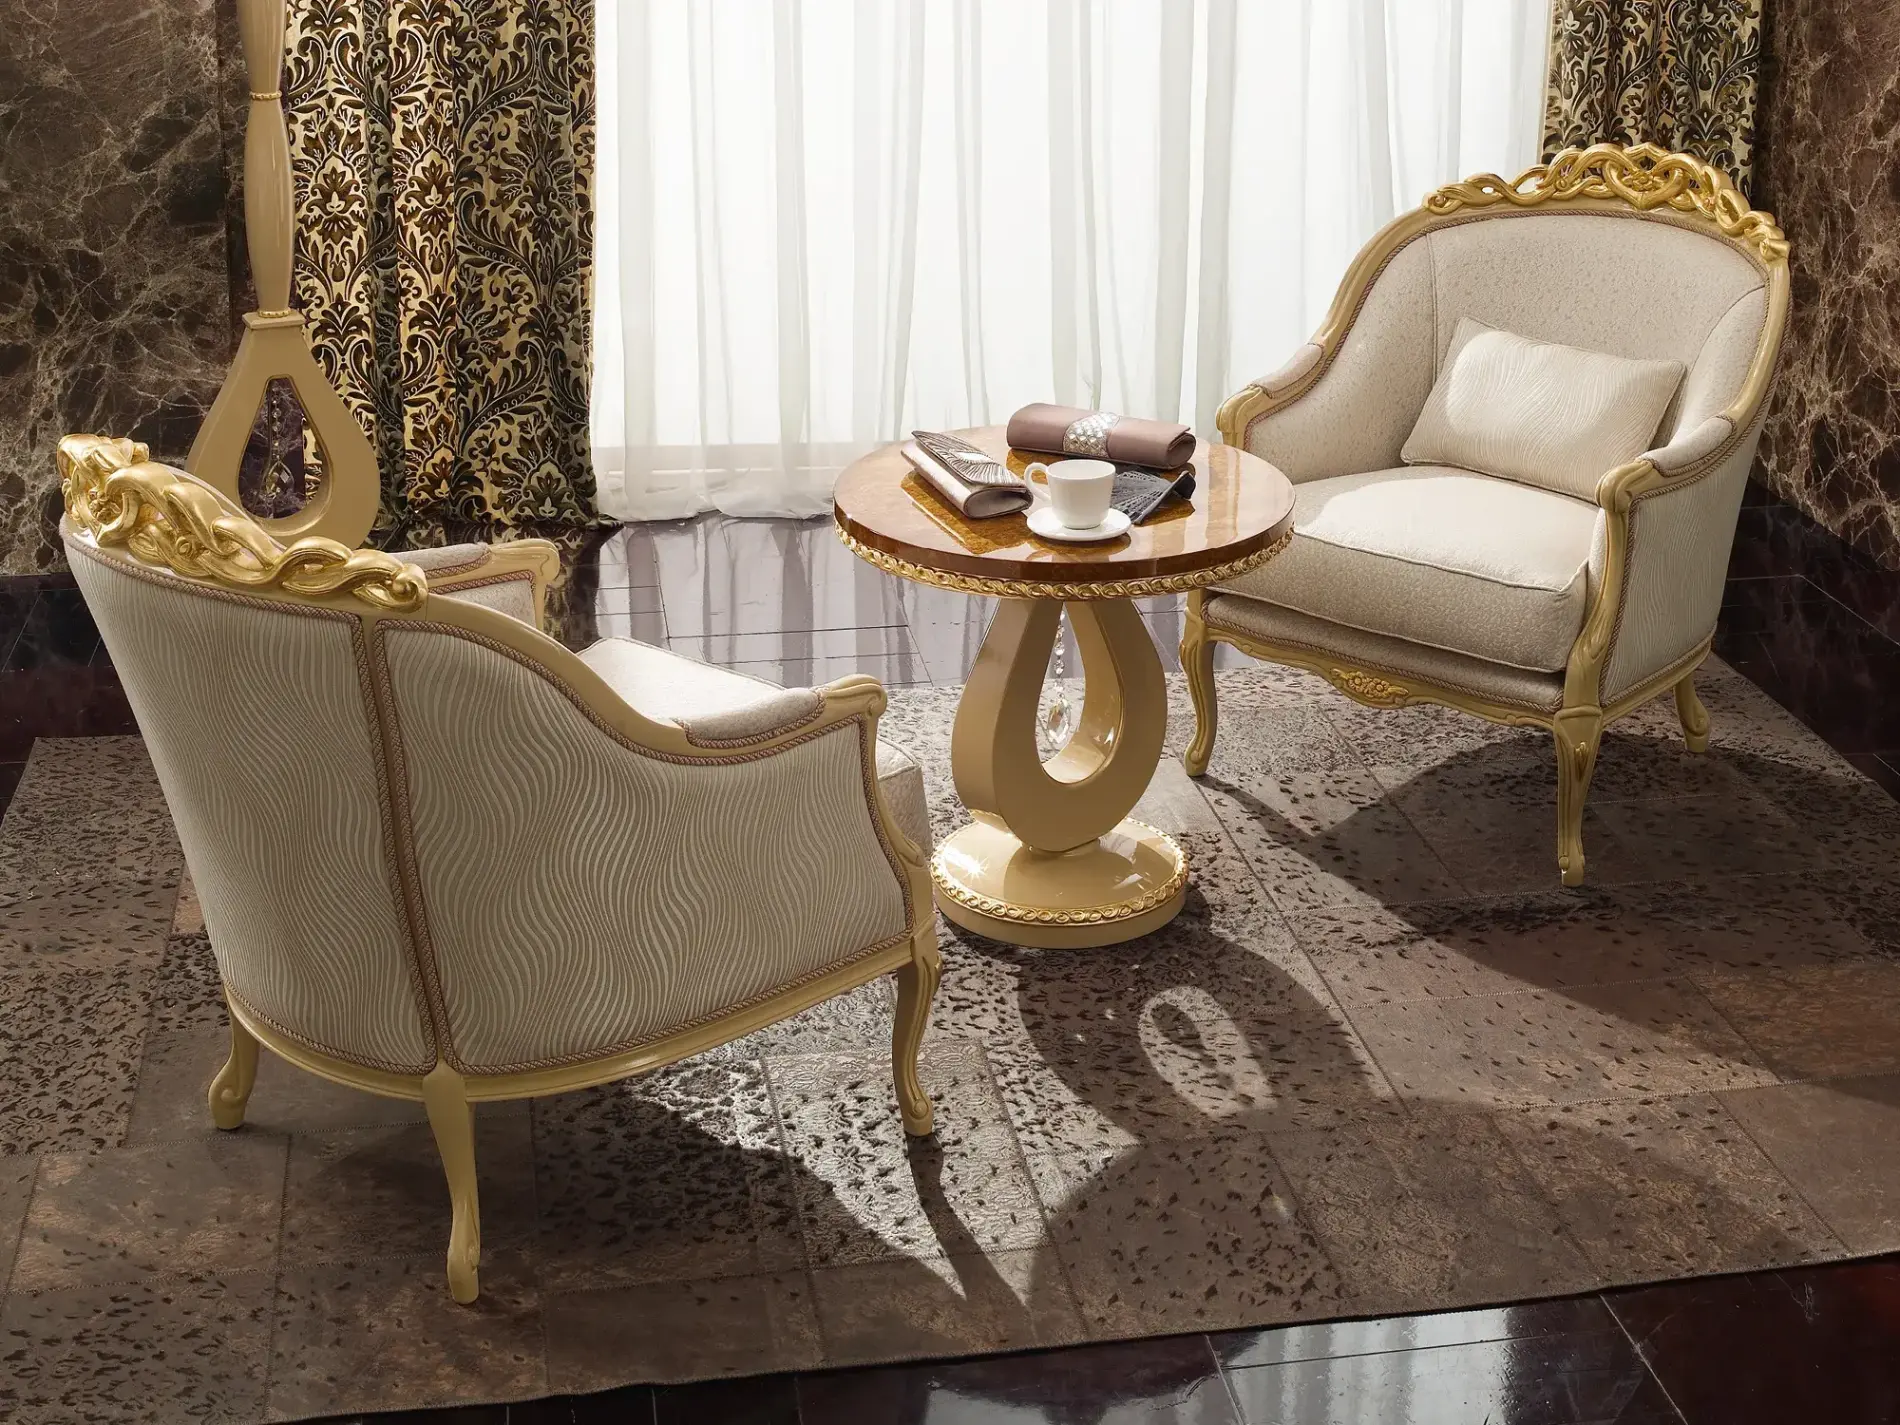 Harmony Luxury Chair with Armrests